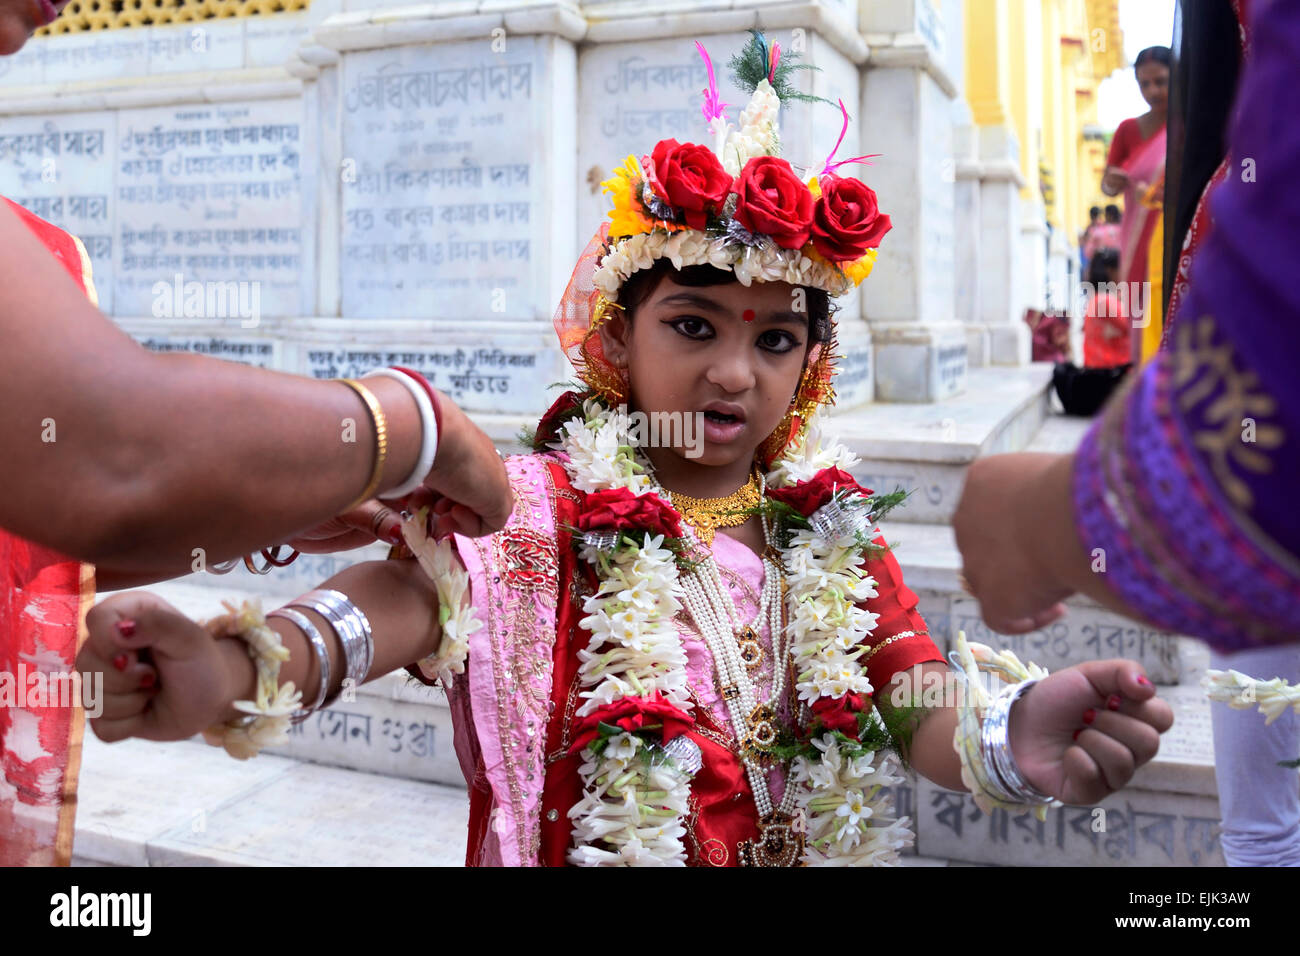 Kolkata, India. 30th Mar, 2015. There are 2000 Kumari been worshiped at Dakshinewar Ramkrishna Sangha Adyapeath, during the occasion of Basanti Puja or Annapurna Puja. Kumari Puja is a tradition of worshiping young pre-pubescent girls as manifestations of the female energy or Devi in Hindu religious tradition. Credit:  Saikat Paul/Pacific Press/Alamy Live News Stock Photo